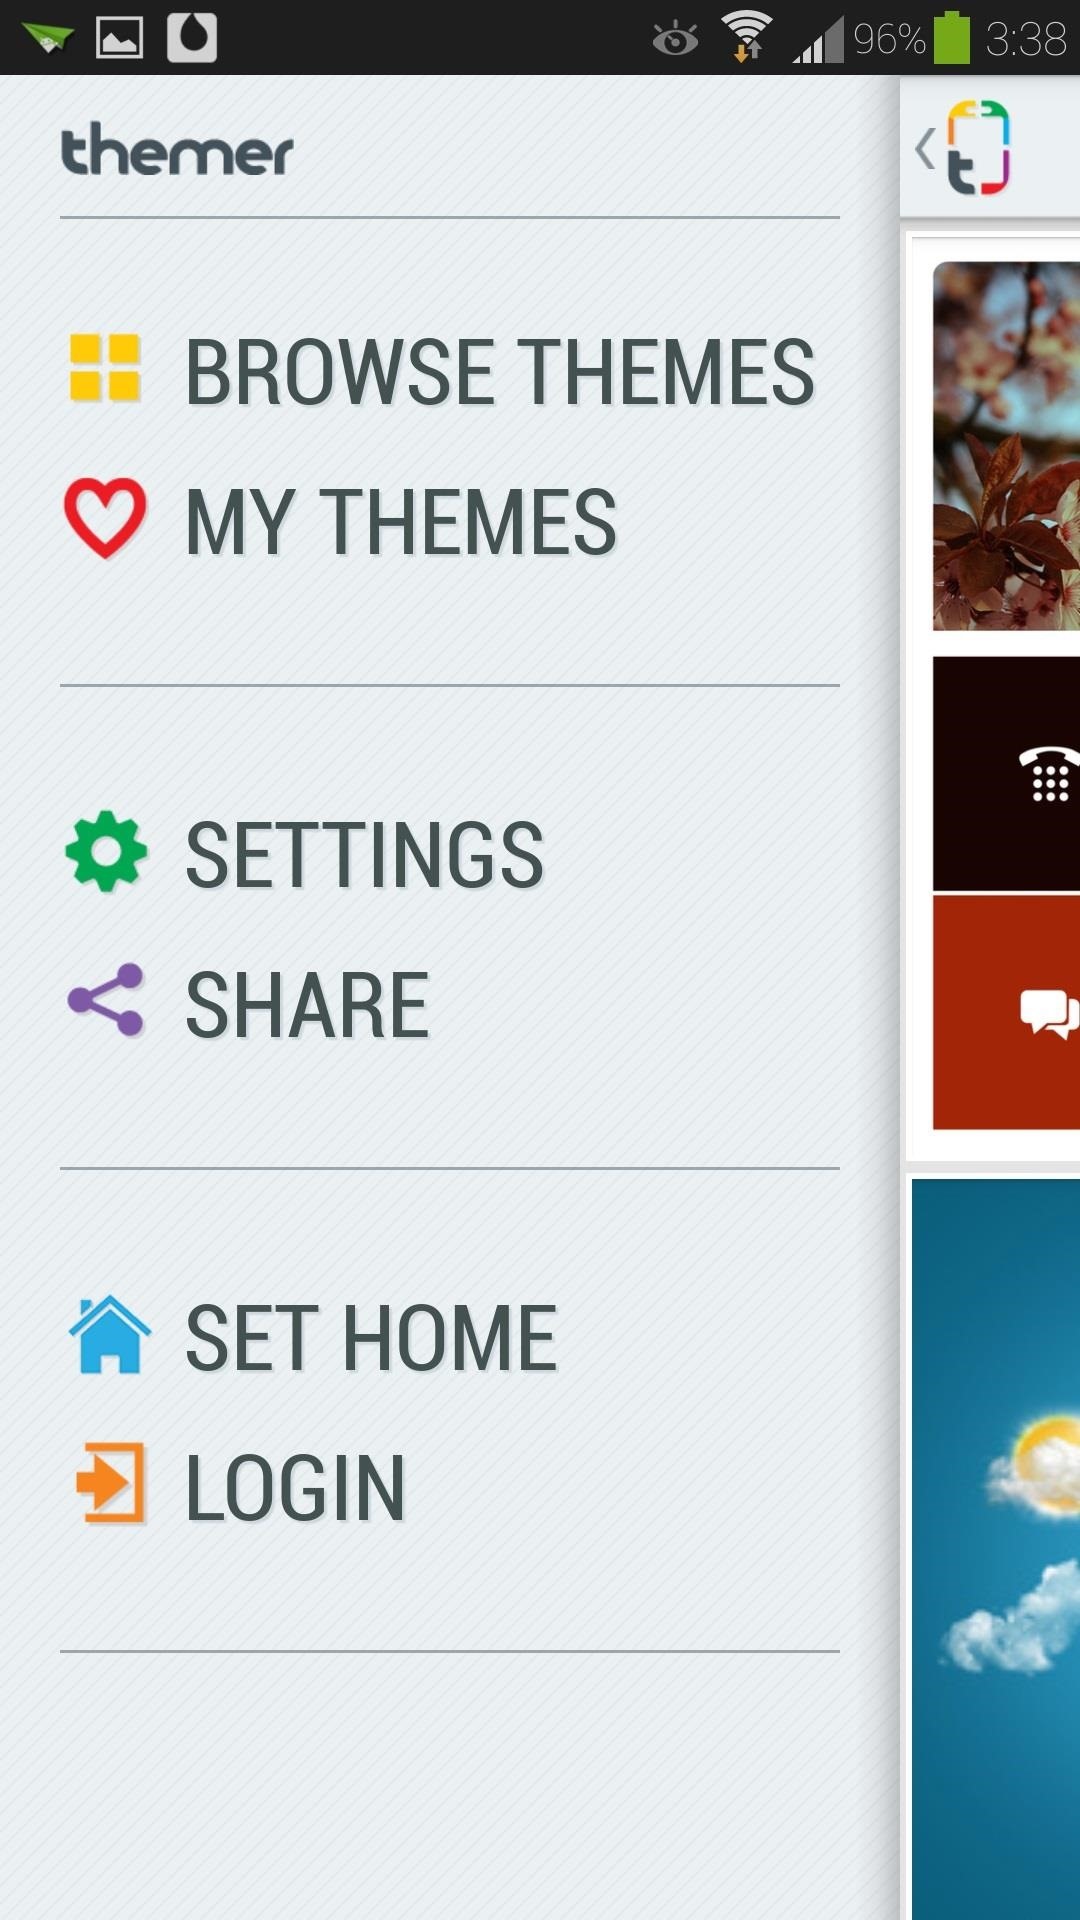 Give Your Samsung Galaxy S4 a Facelift with a New Home Screen Theme of Your Choice